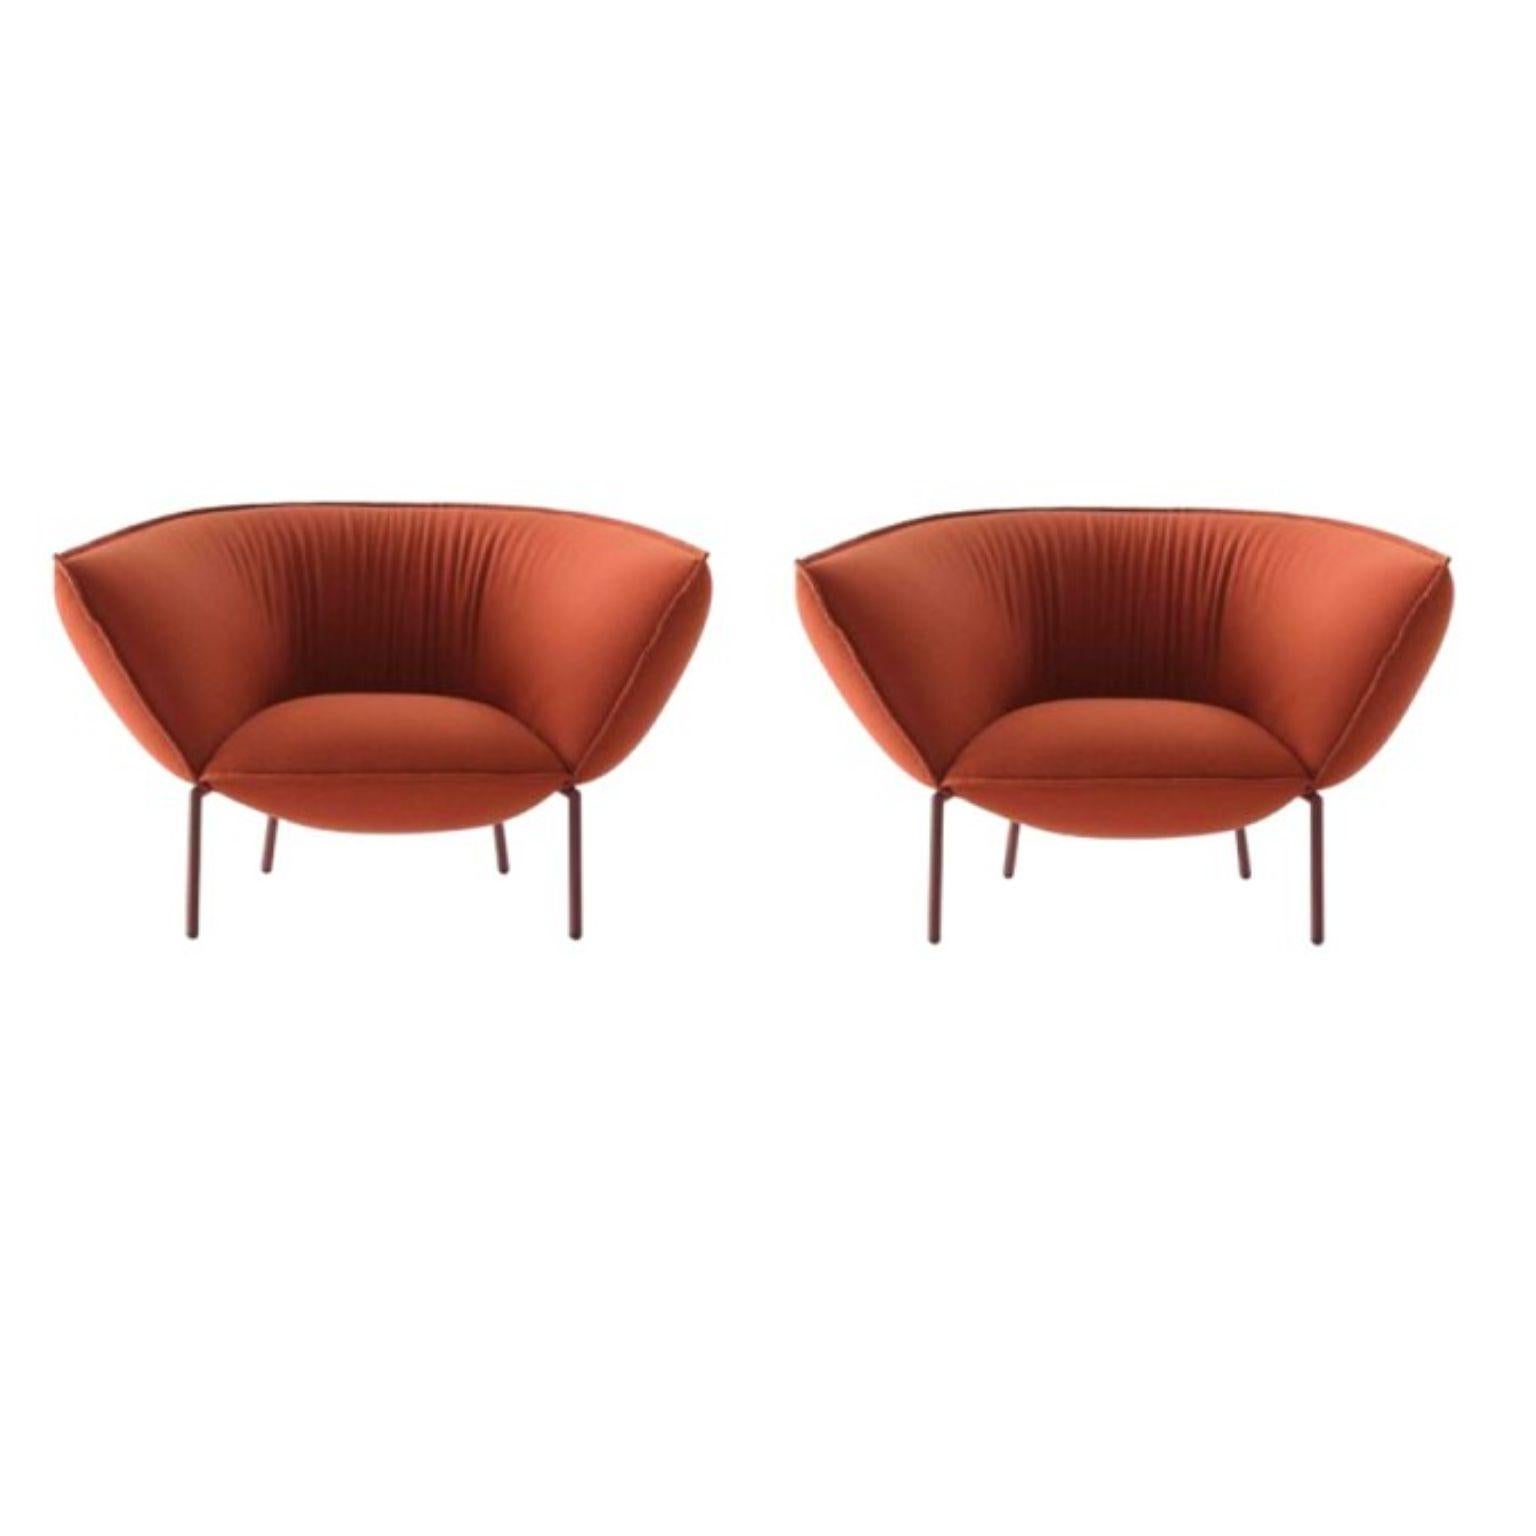 Set of 2 Black Chromed You Armchairs by Luca Nichetto
Materials: Lacquered metal structure. Fabric upholstery. Structure colors: Black chrome, red or beige lacquered. Seat and back coated with polyurethane foam expanded with a density of 50 kg and